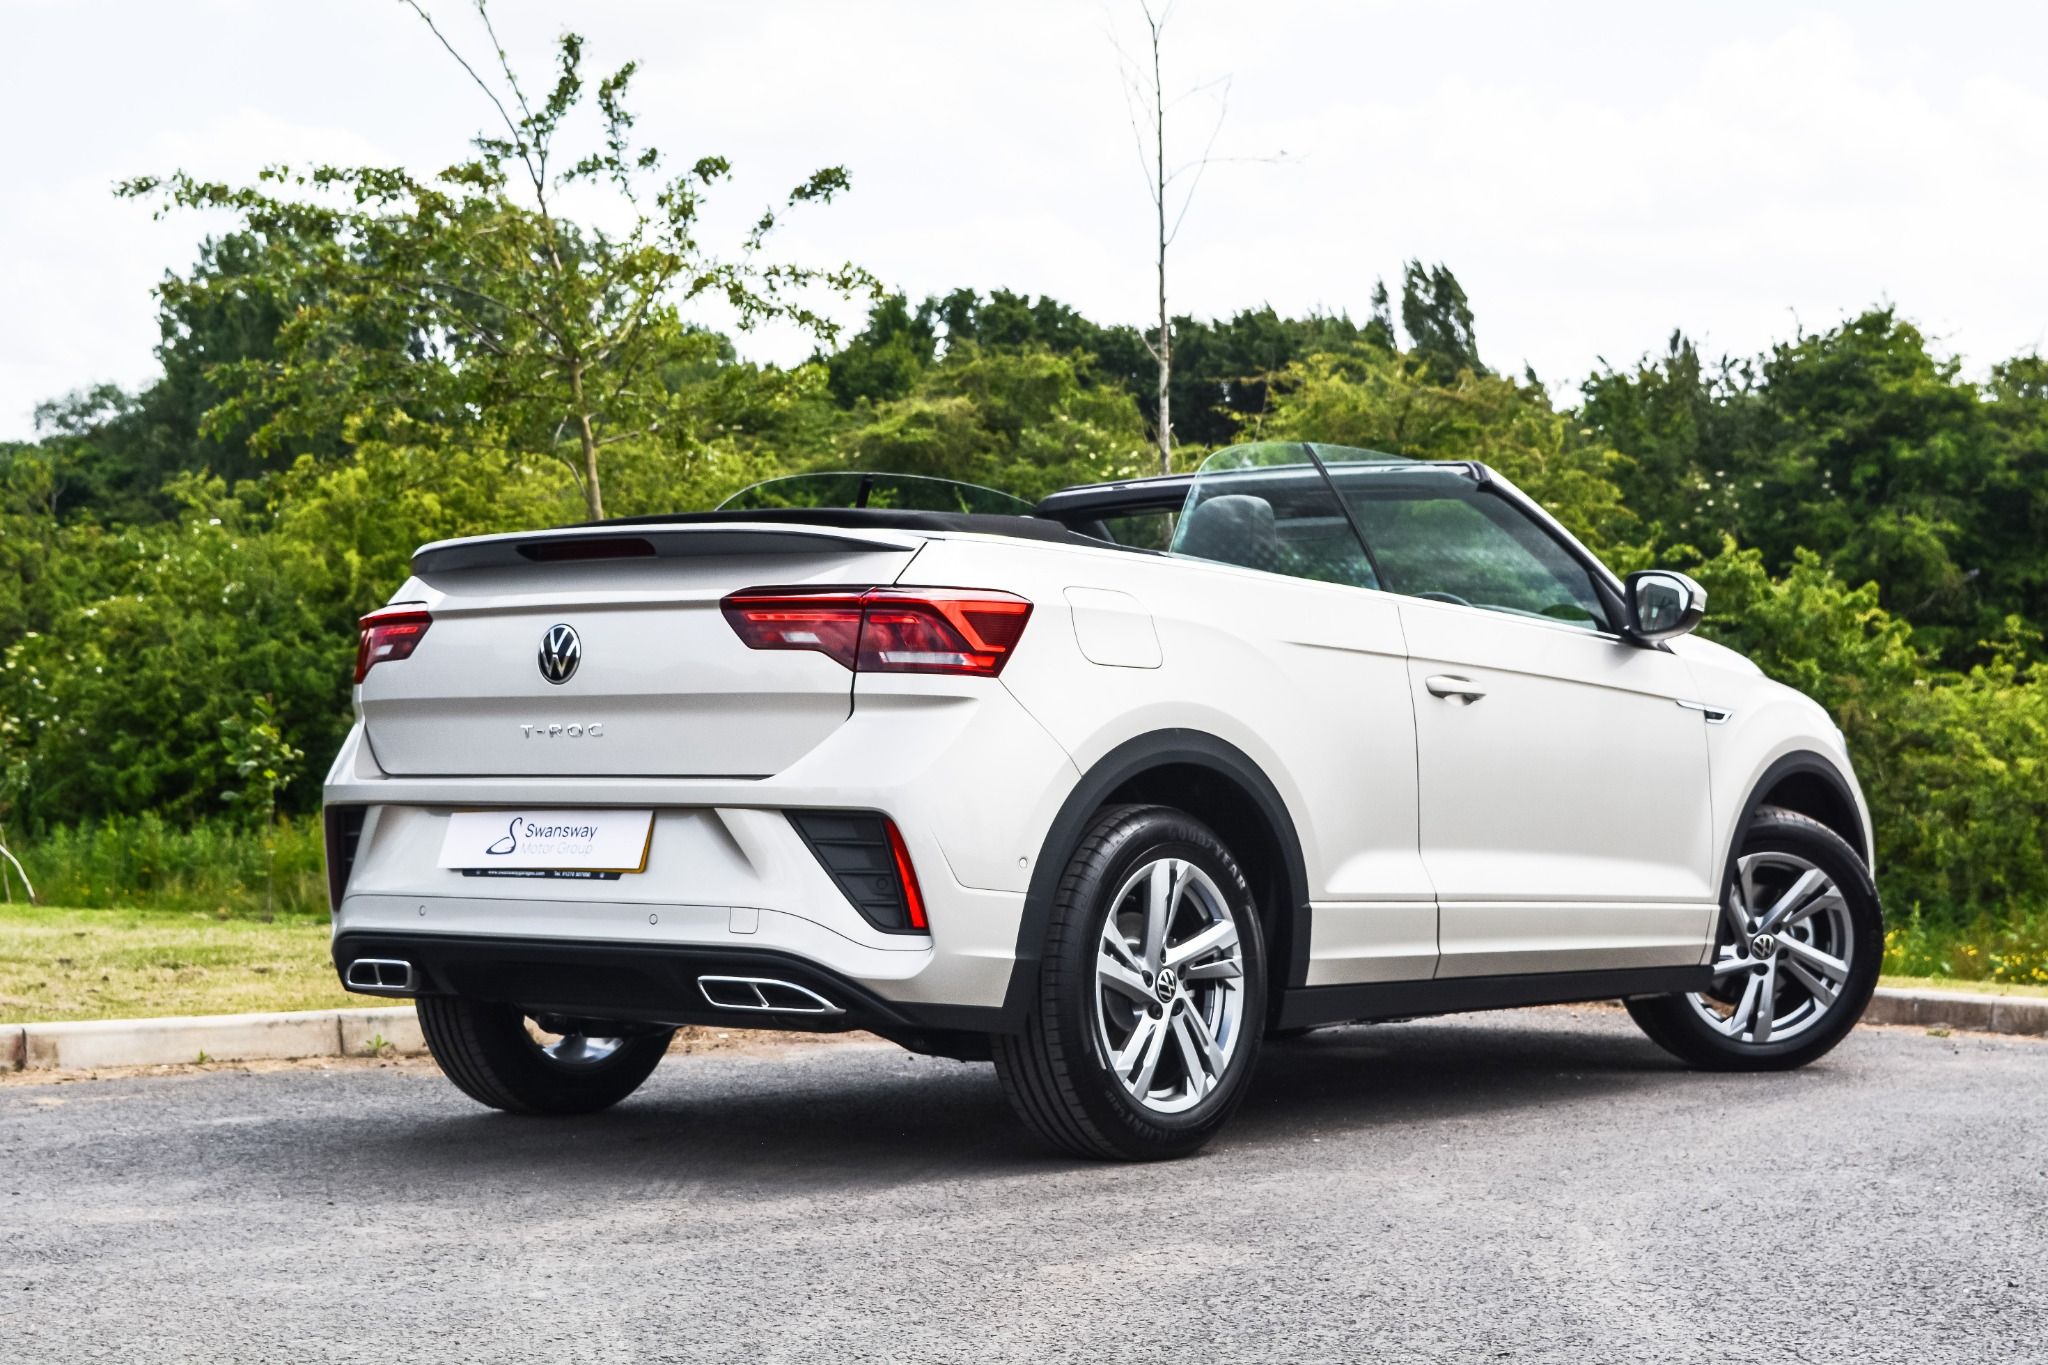 Rear or t-roc cabriolet with roof down